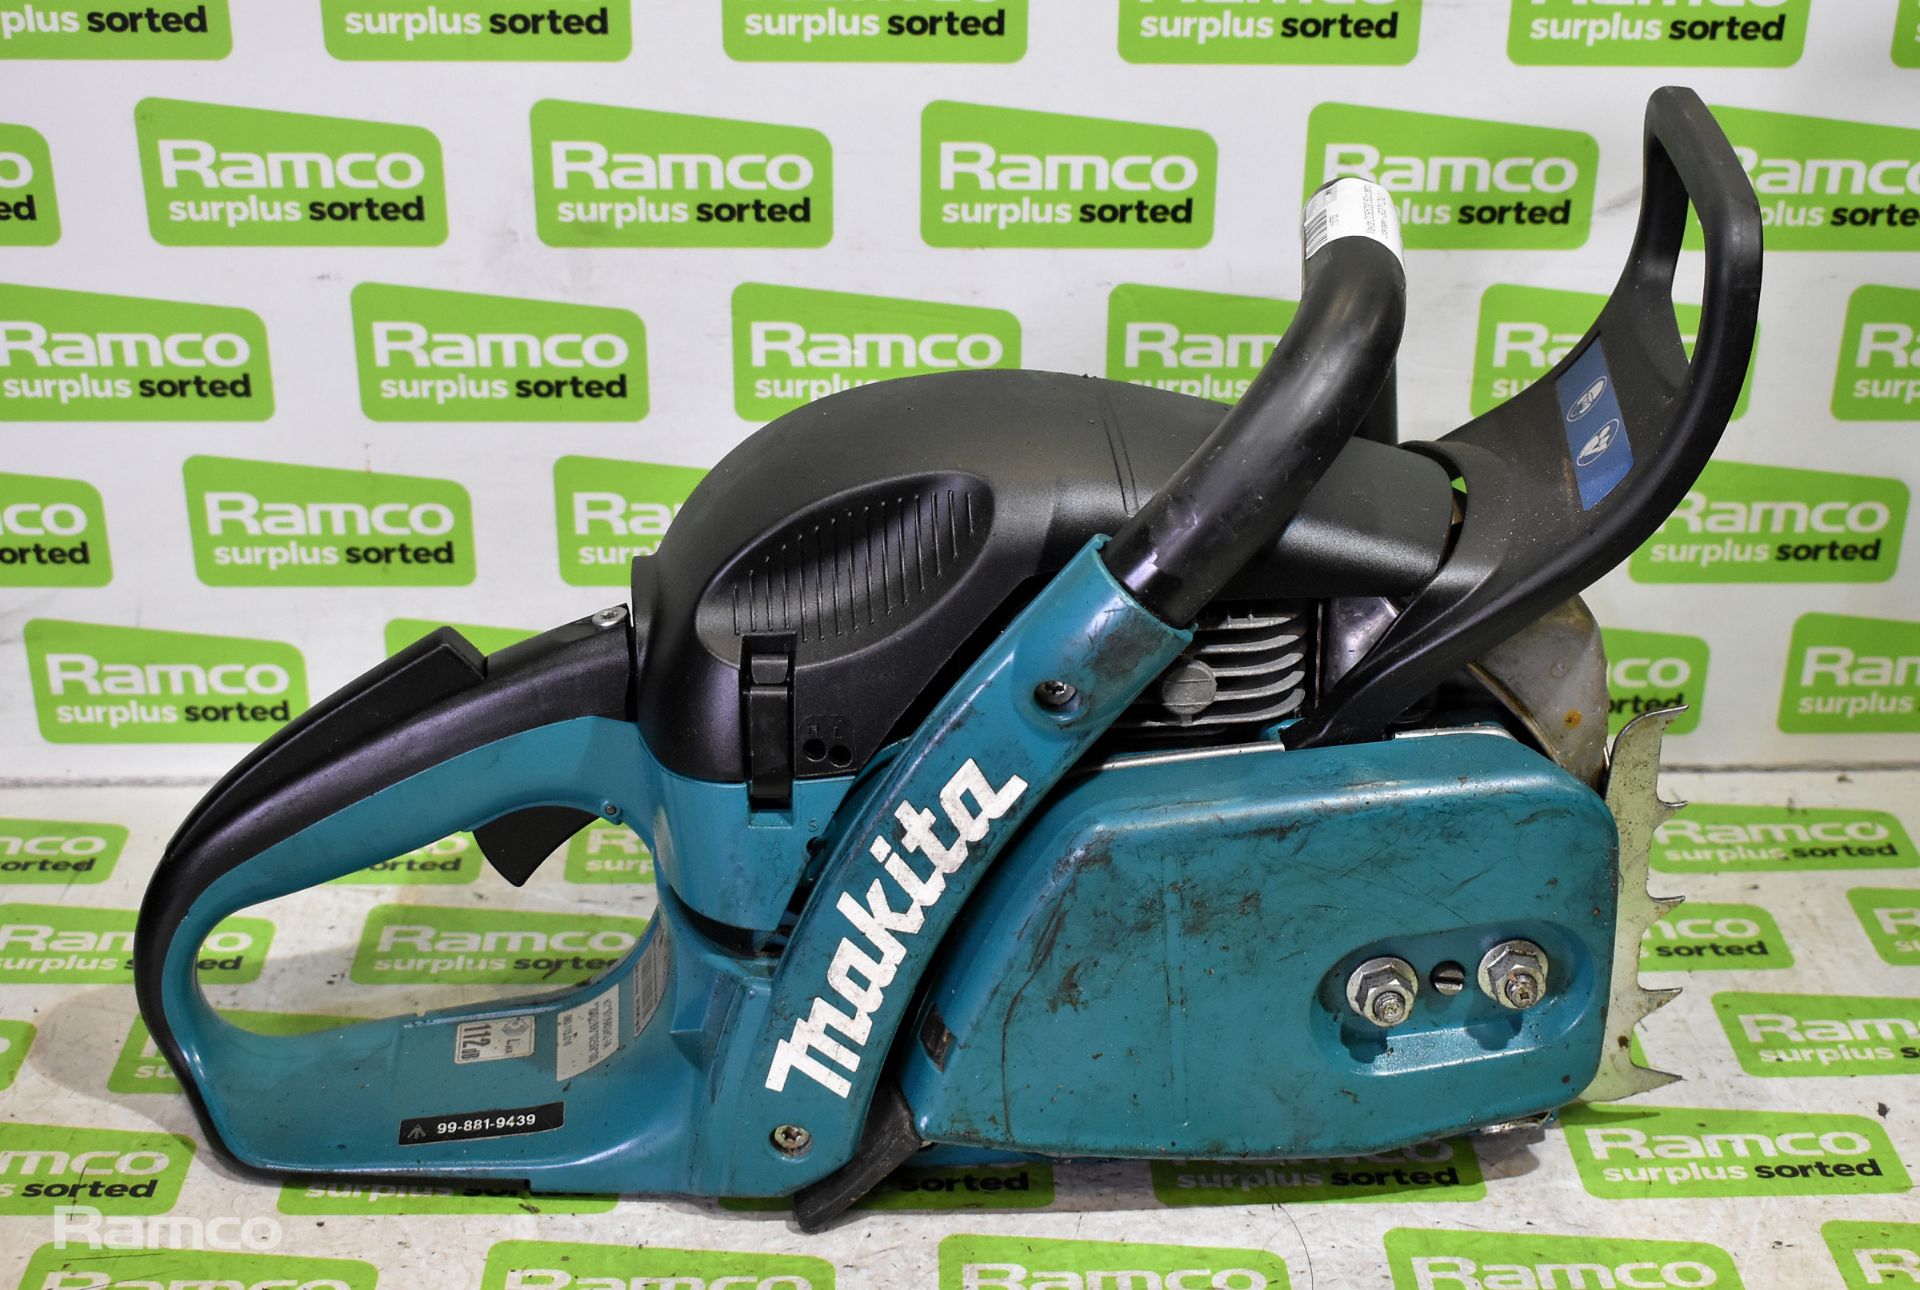 4x Makita DCS5030 50cc petrol chainsaws - BODIES ONLY - AS SPARES OR REPAIRS - Image 2 of 22